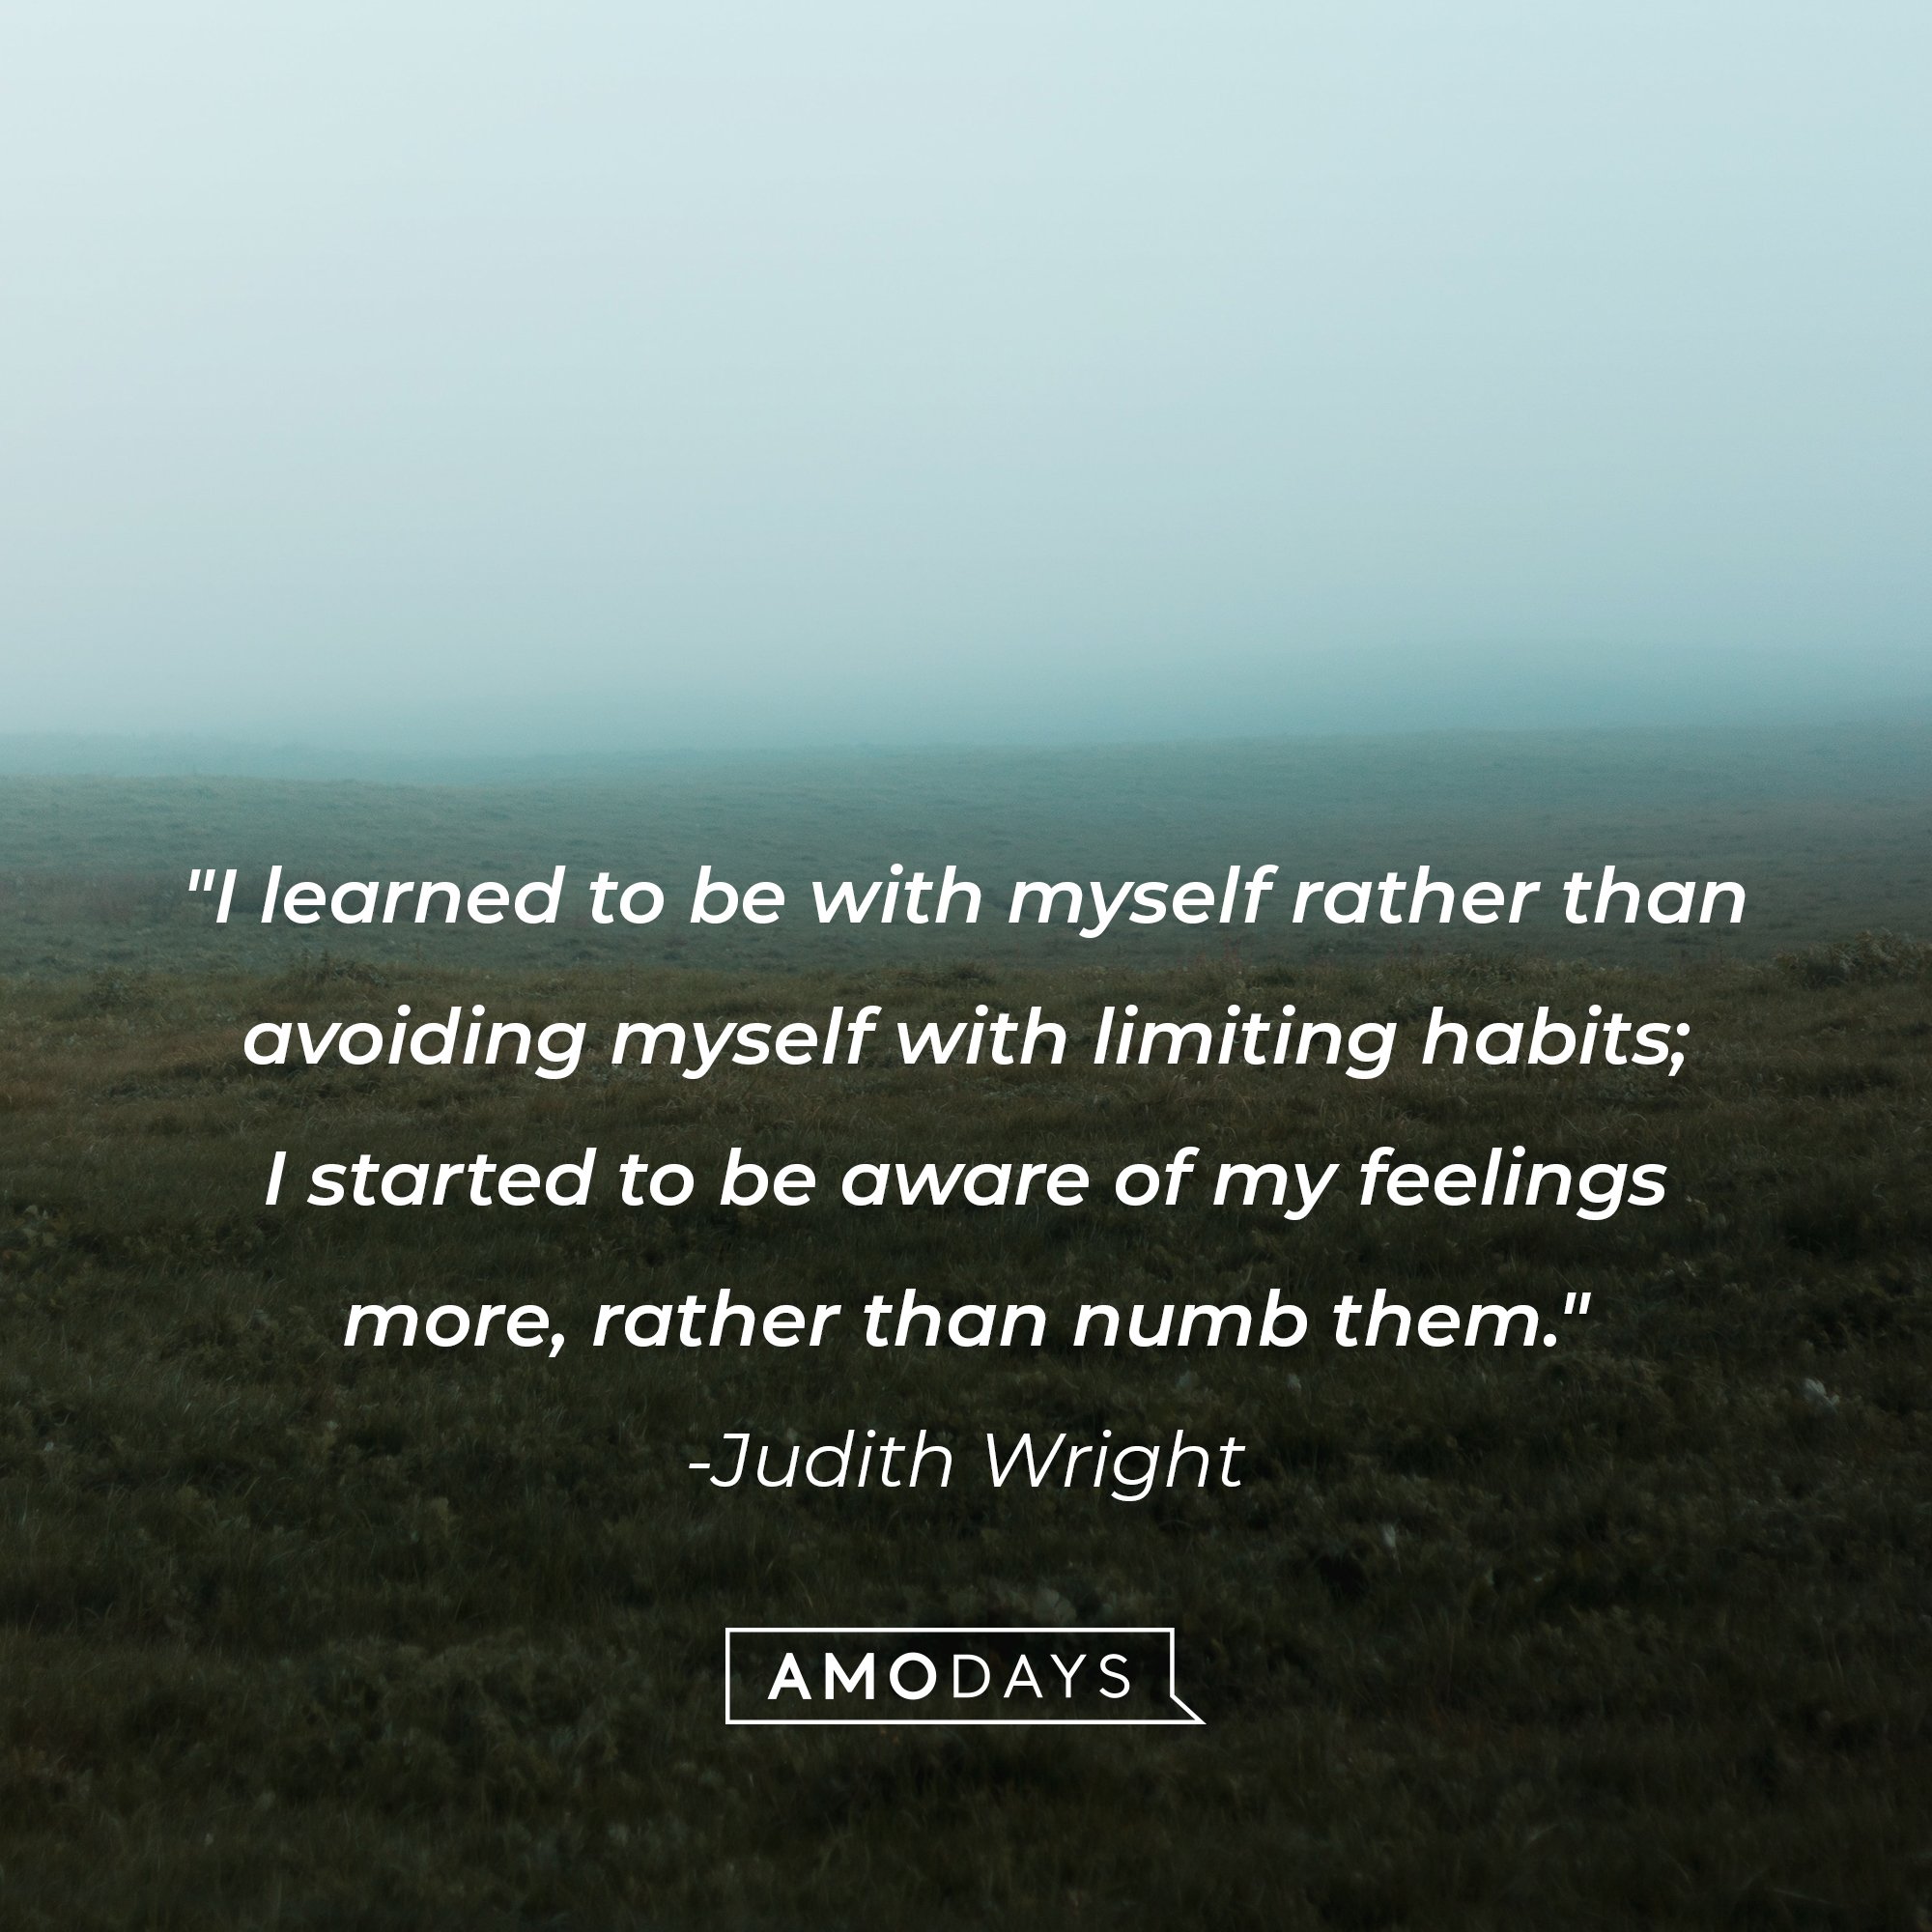  Judith Wright’s quote: "I learned to be with myself rather than avoiding myself with limiting habits; I started to be aware of my feelings more, rather than numb them." | Image: AmoDays 